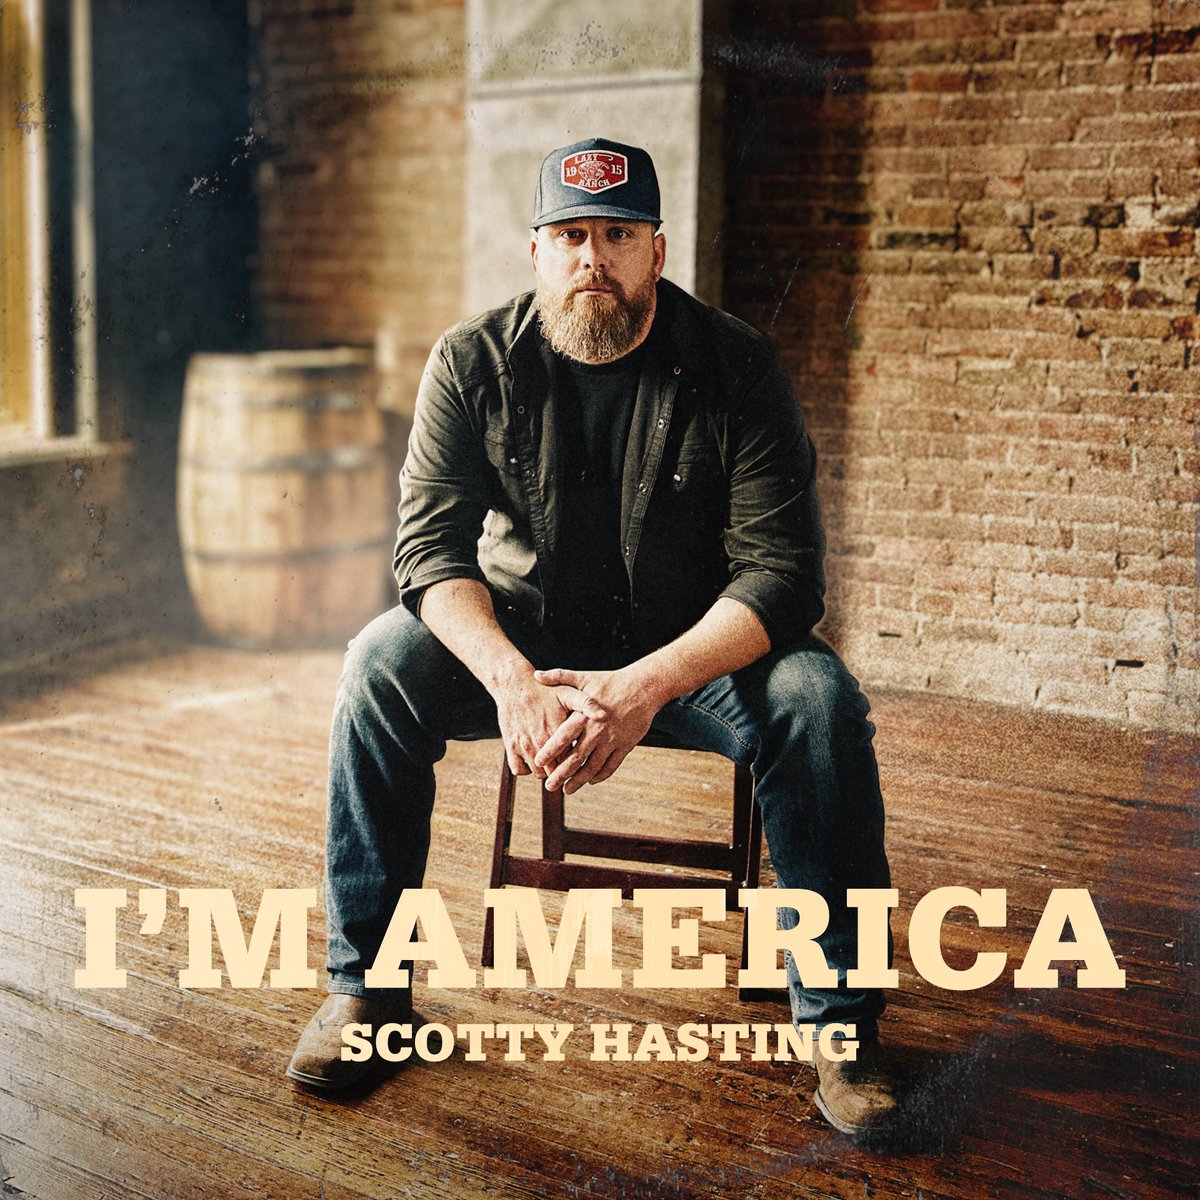 The debut EP from Scotty Hasting, I’m America, is out now! Check it out now at orcd.co/shimamericaep